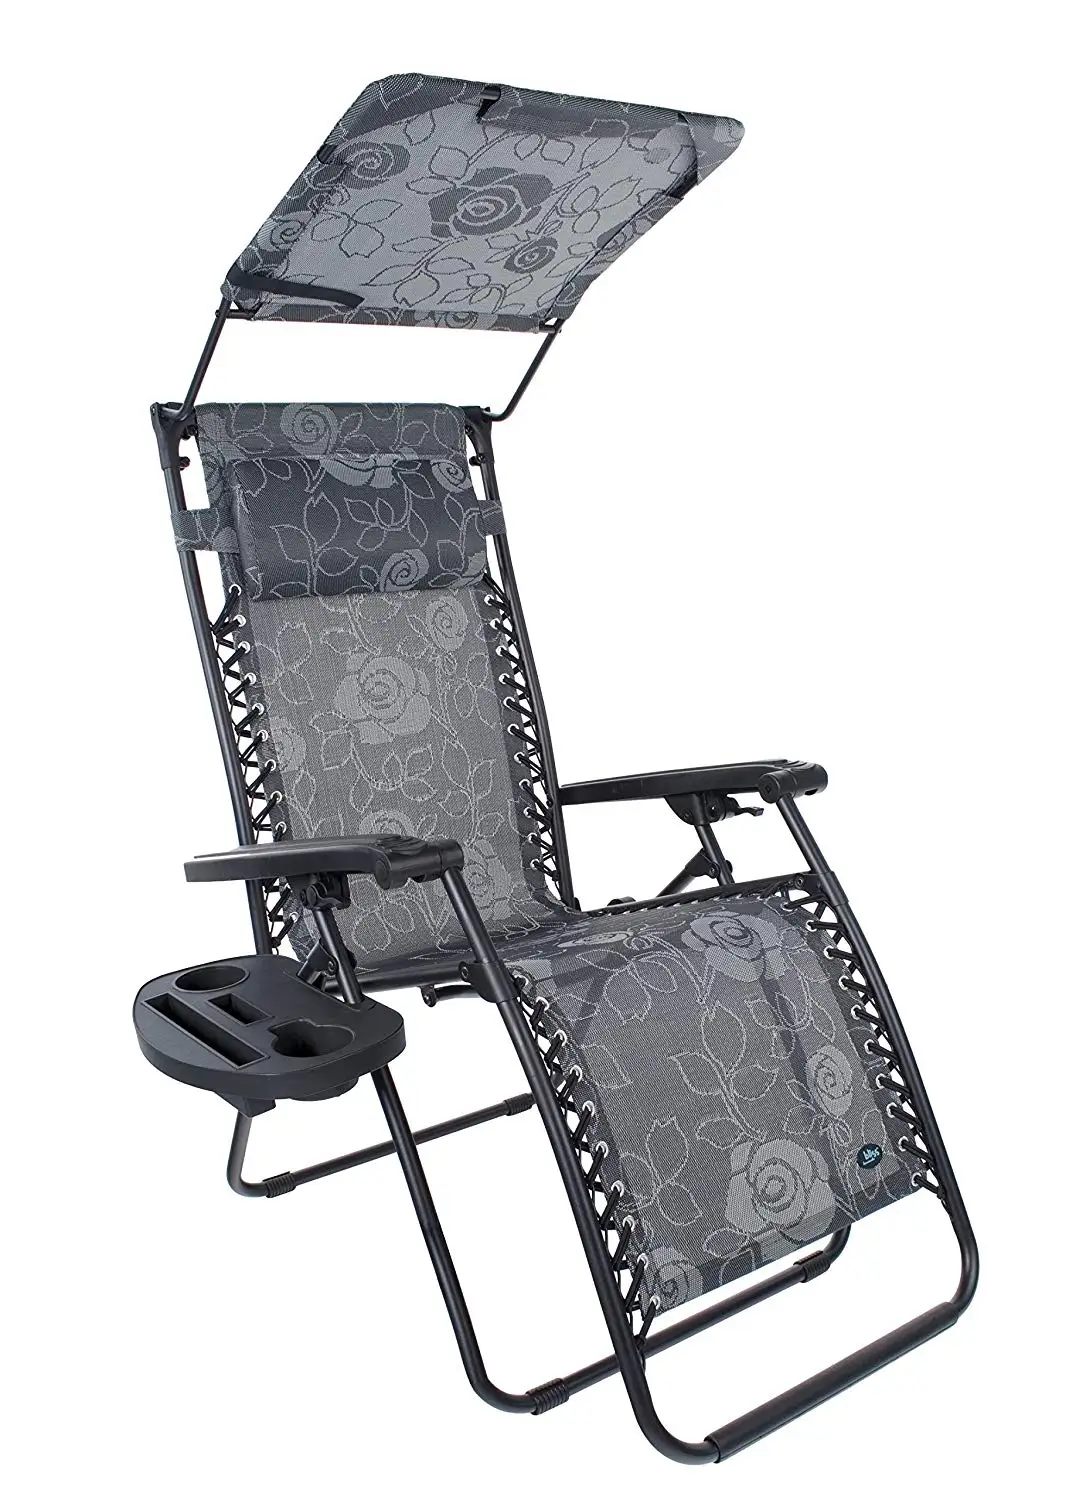 Cheap Anti Gravity Recliner Find Anti Gravity Recliner Deals On